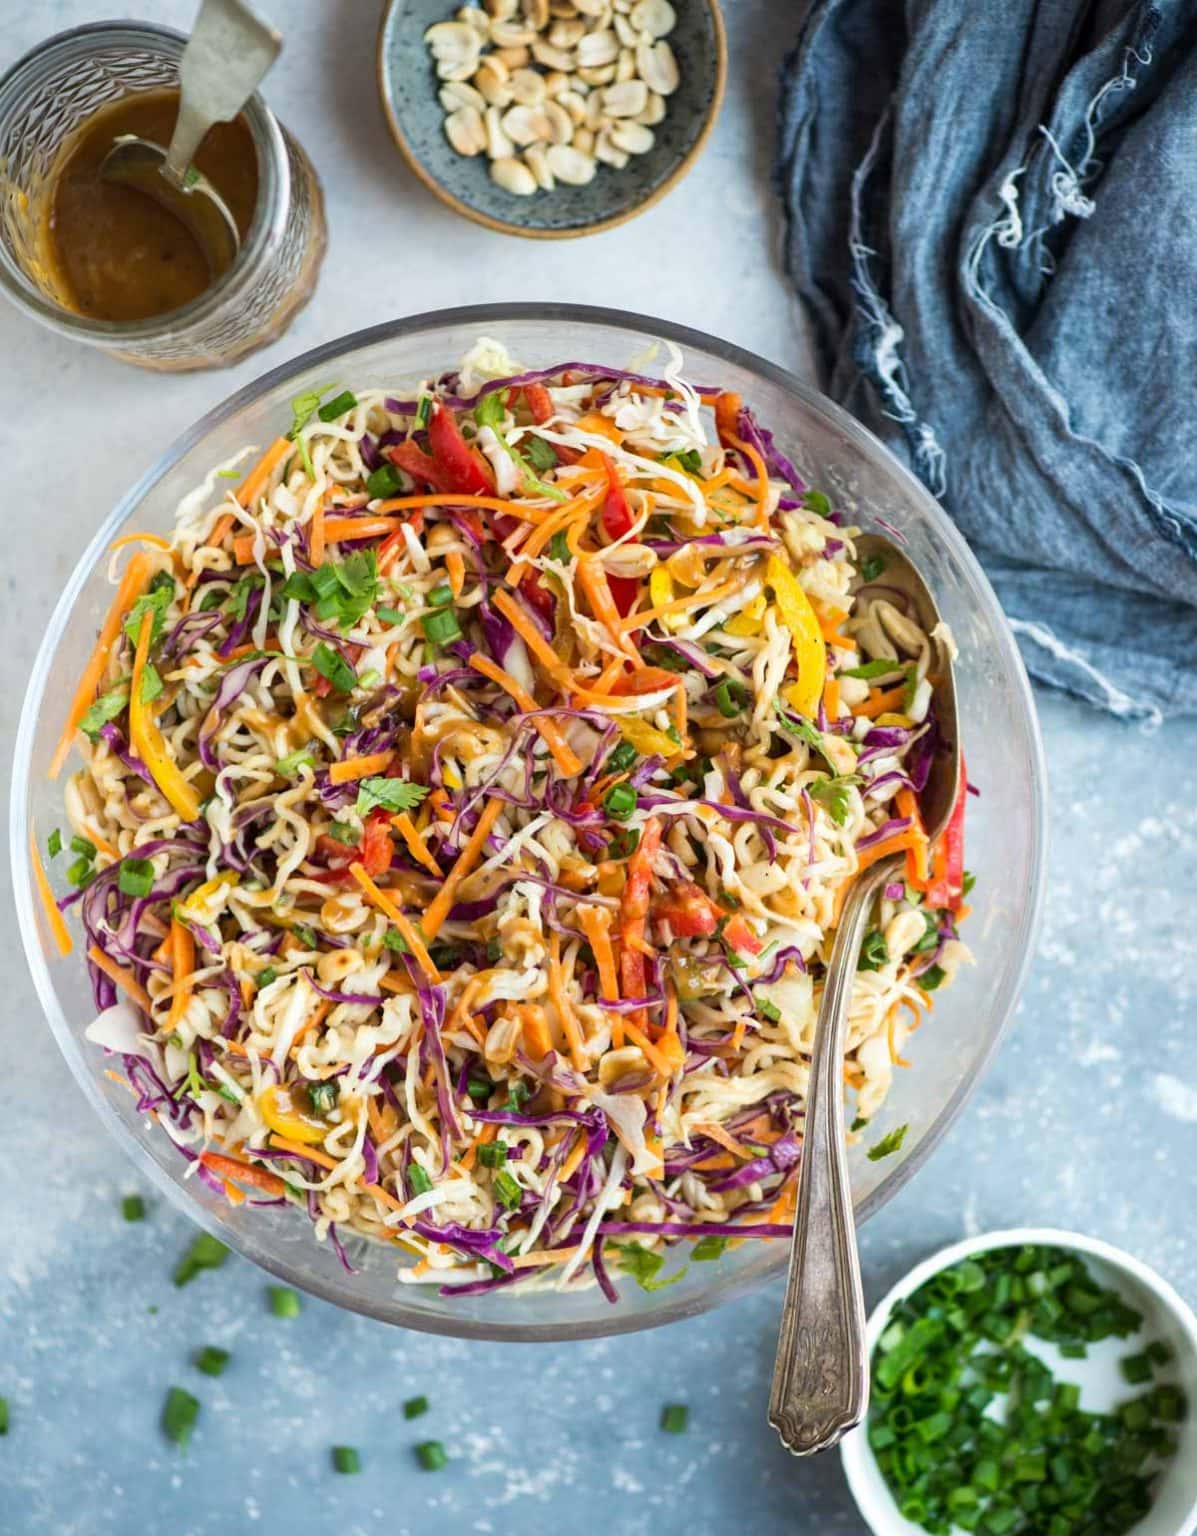 Ramen Noodles Salad With Peanut Dressing - The flavours of kitchen